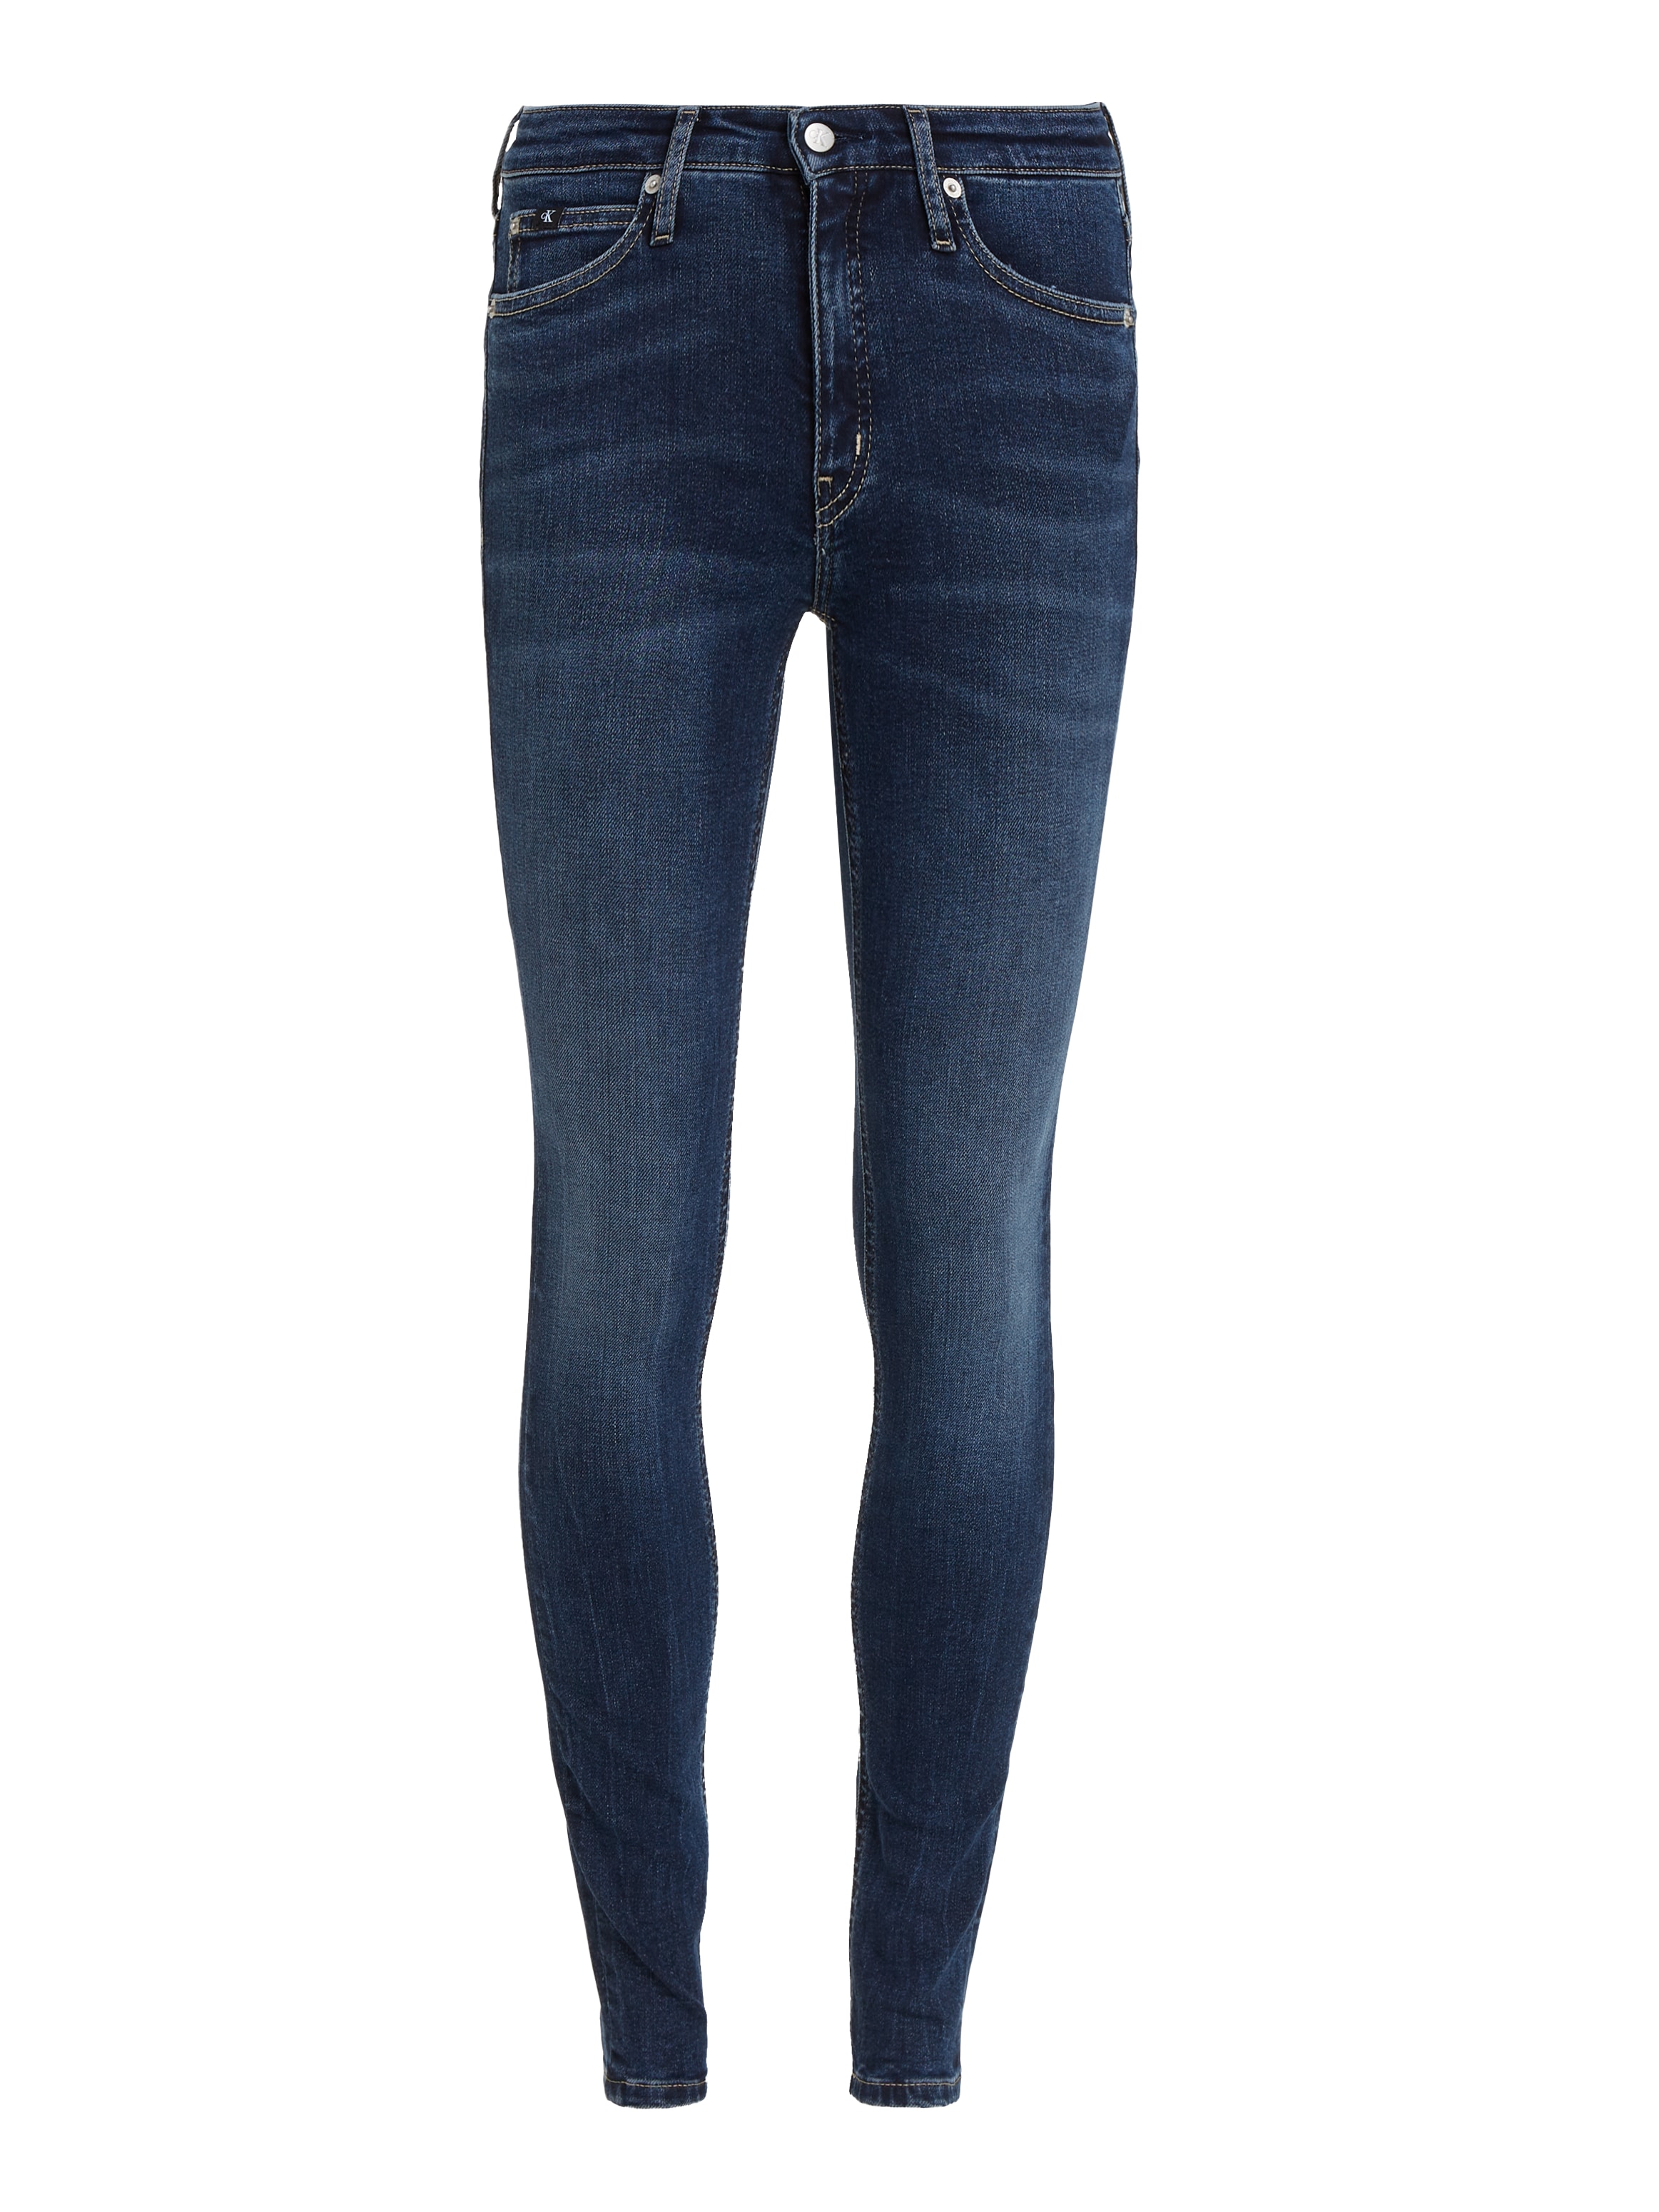 Calvin Klein Jeans Skinny-fit-Jeans »MID bei SKINNY« RISE ♕